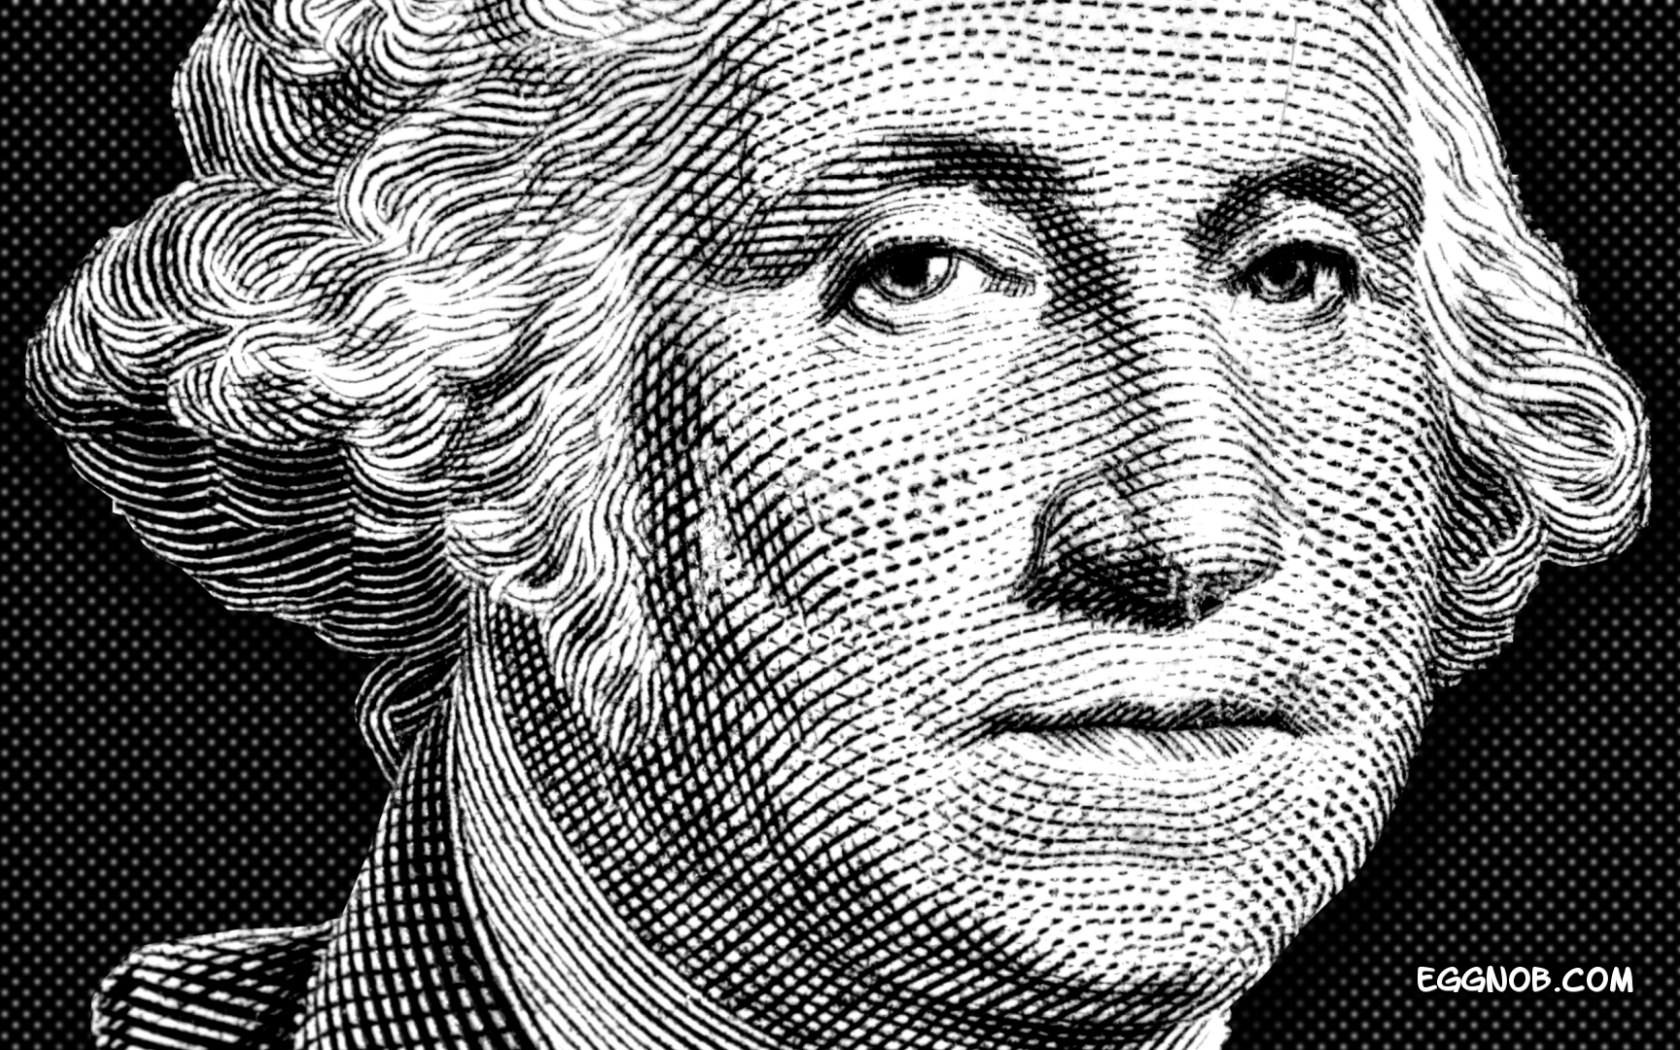 George Washington was our second tallest president. At 6'2", he was second only to Lincoln and the same height as Lyndon Johnson.